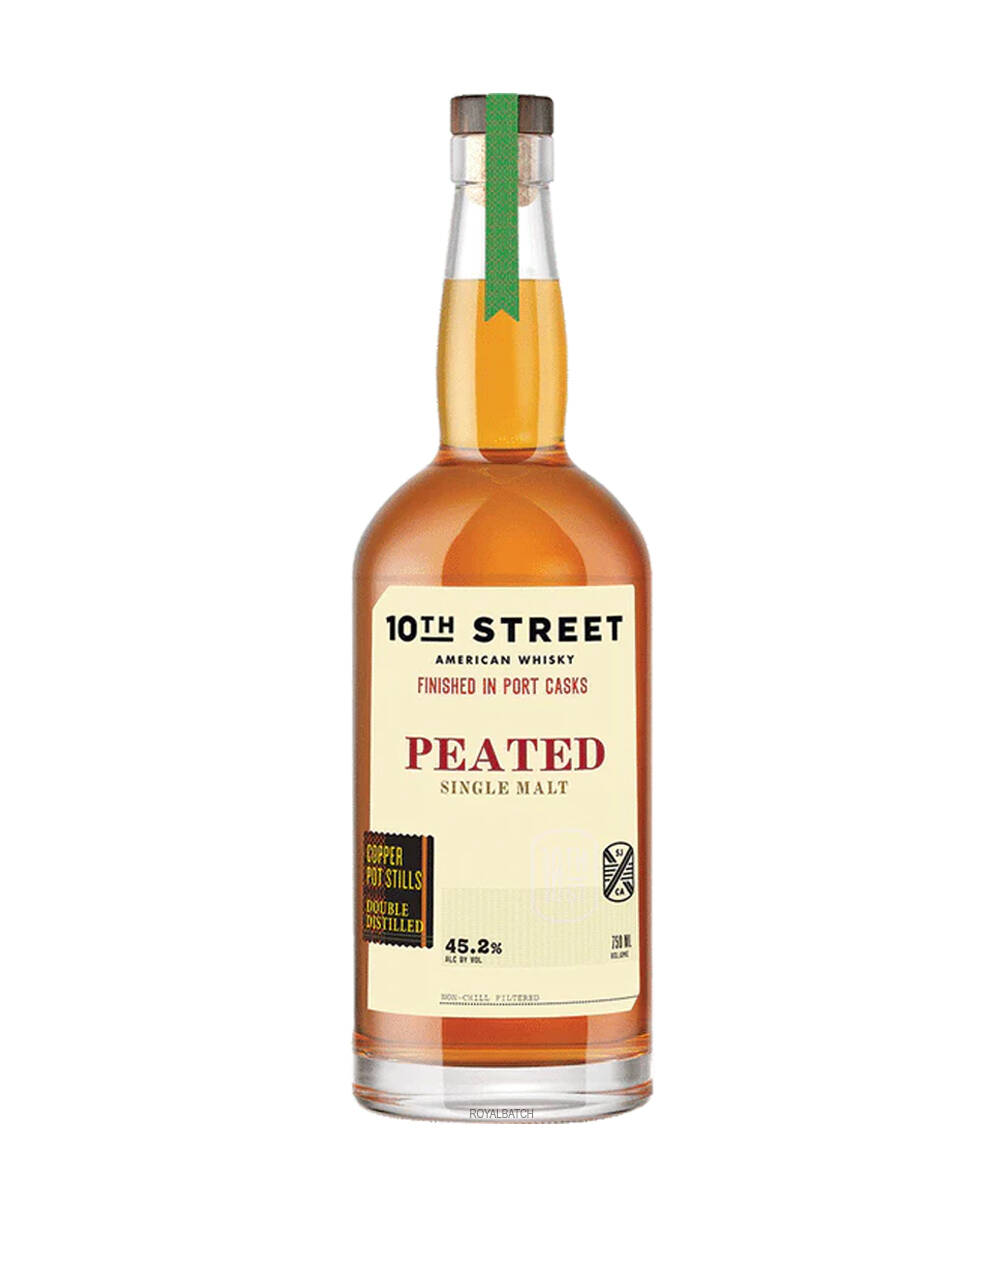 10th Street Peated Sinlge Malt Finished in Port Casks American Whiskey